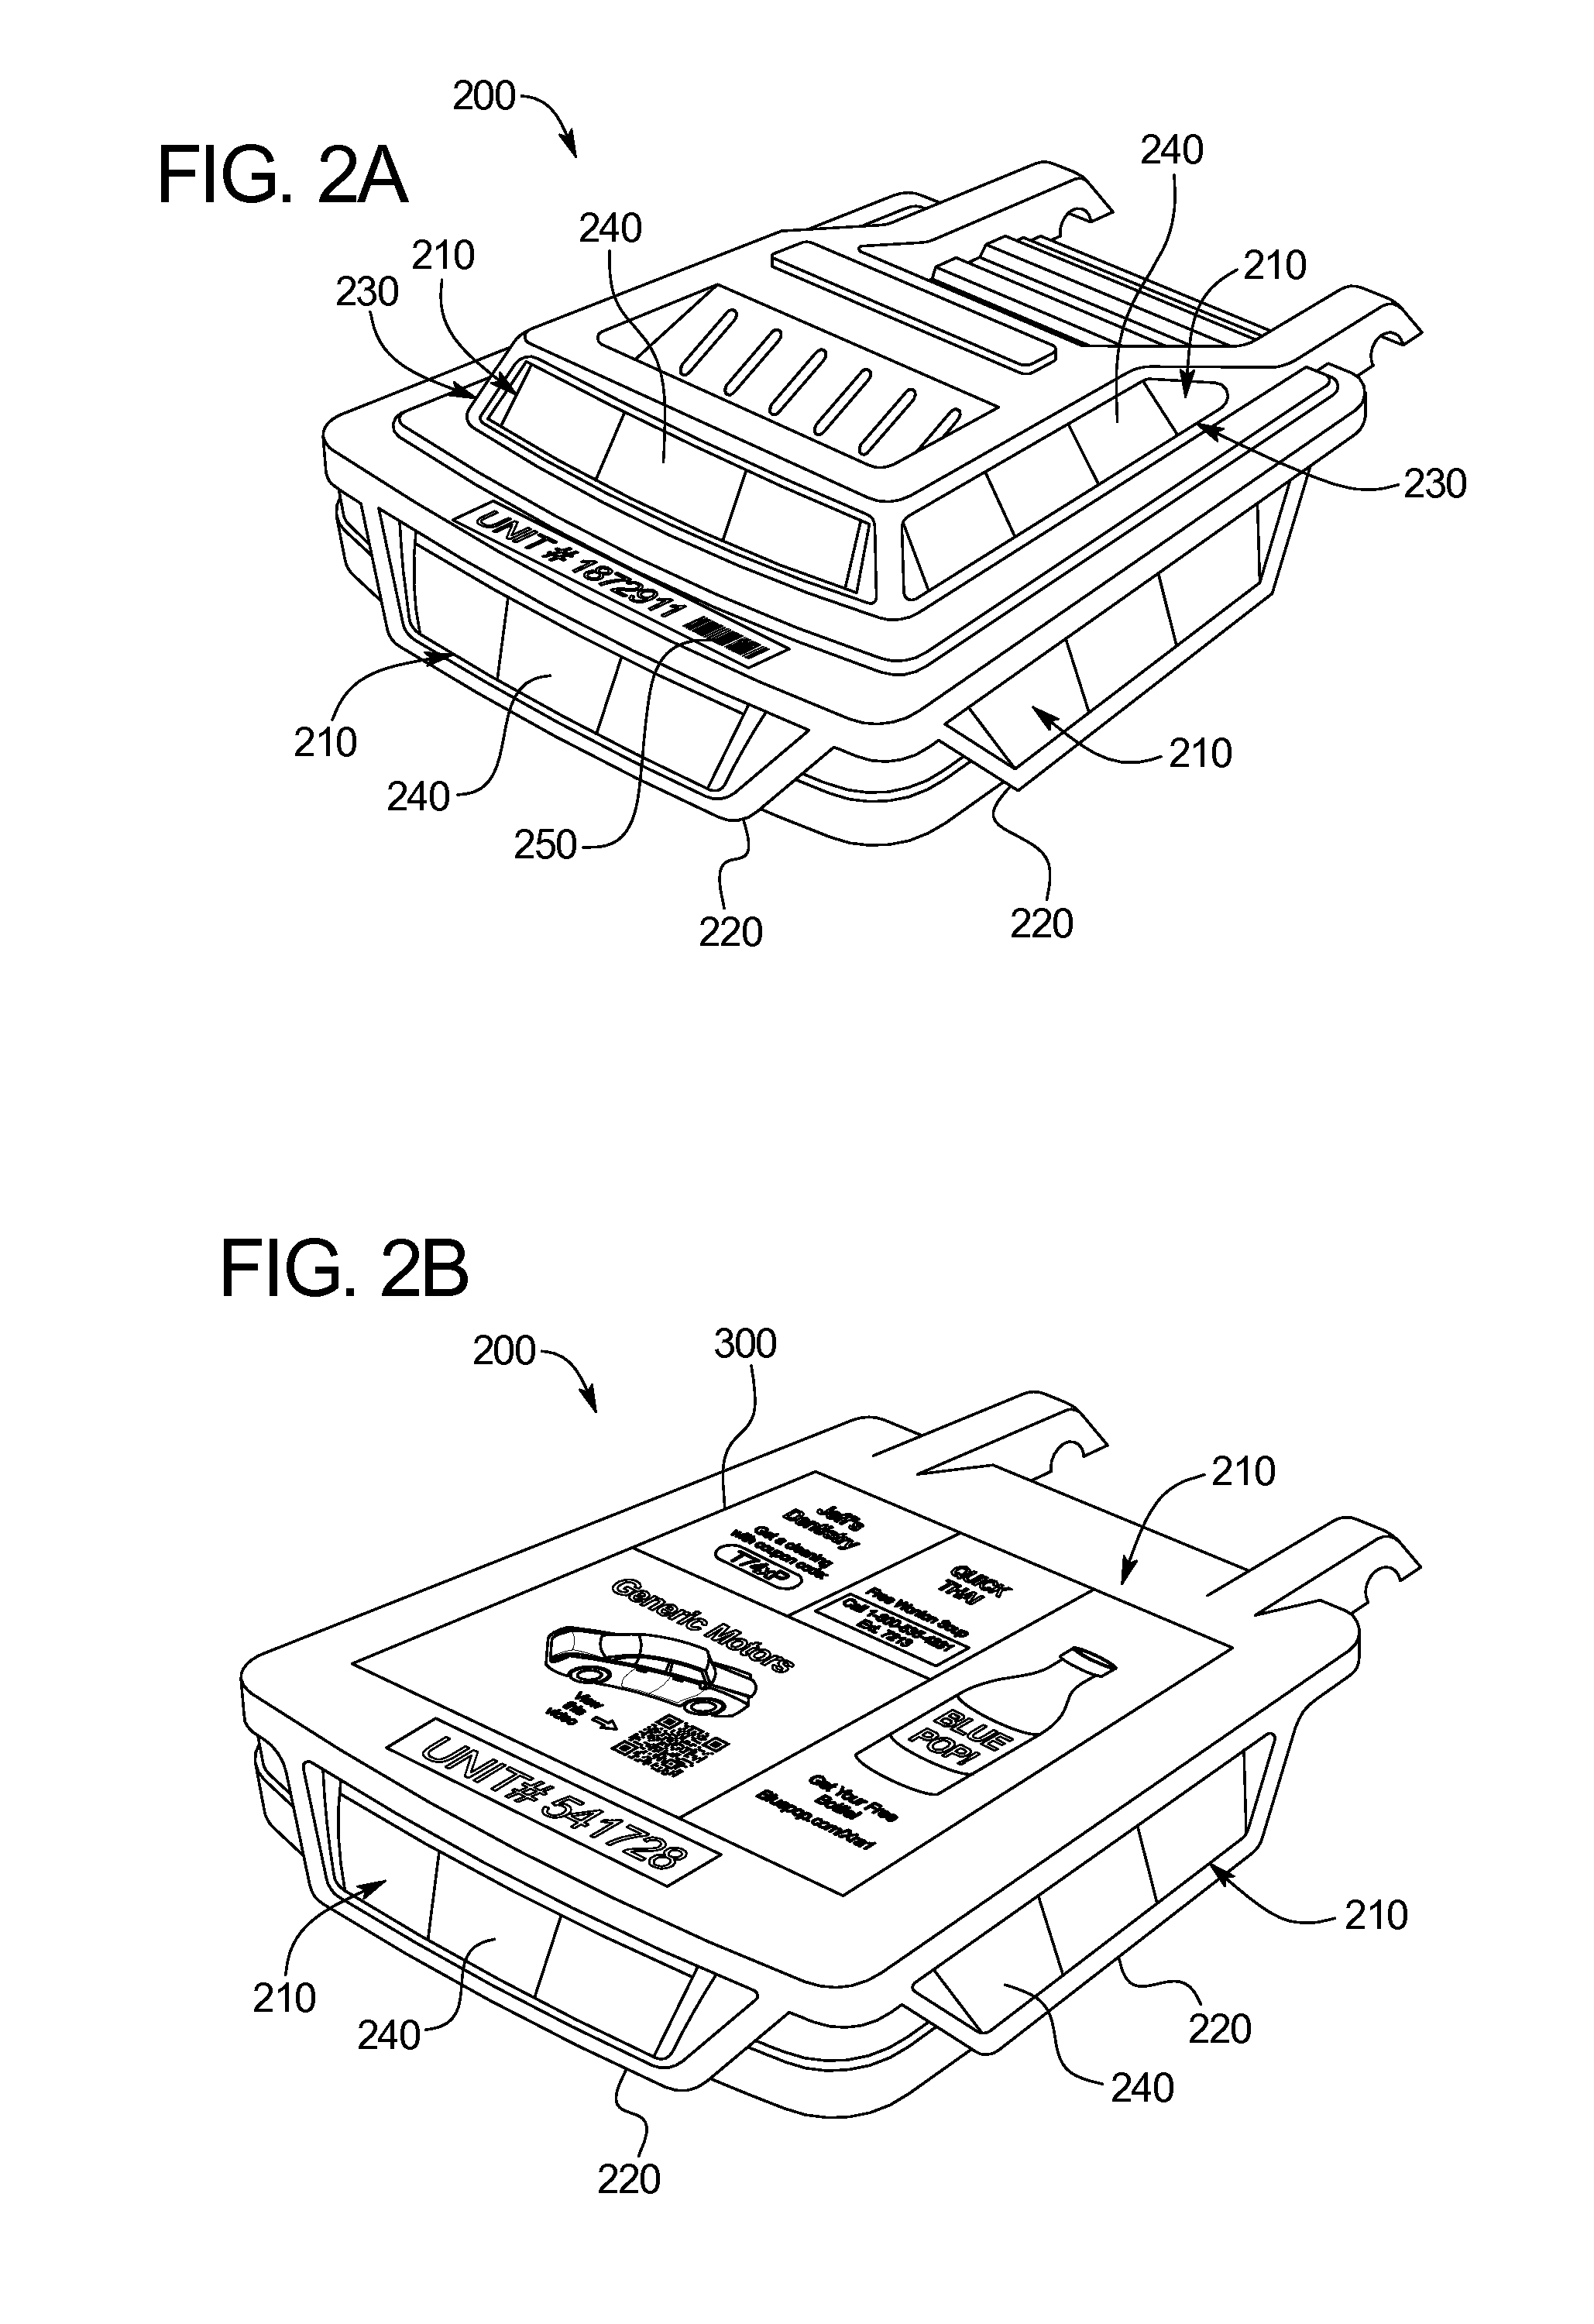 Curbside cart direct marketing systems and methods